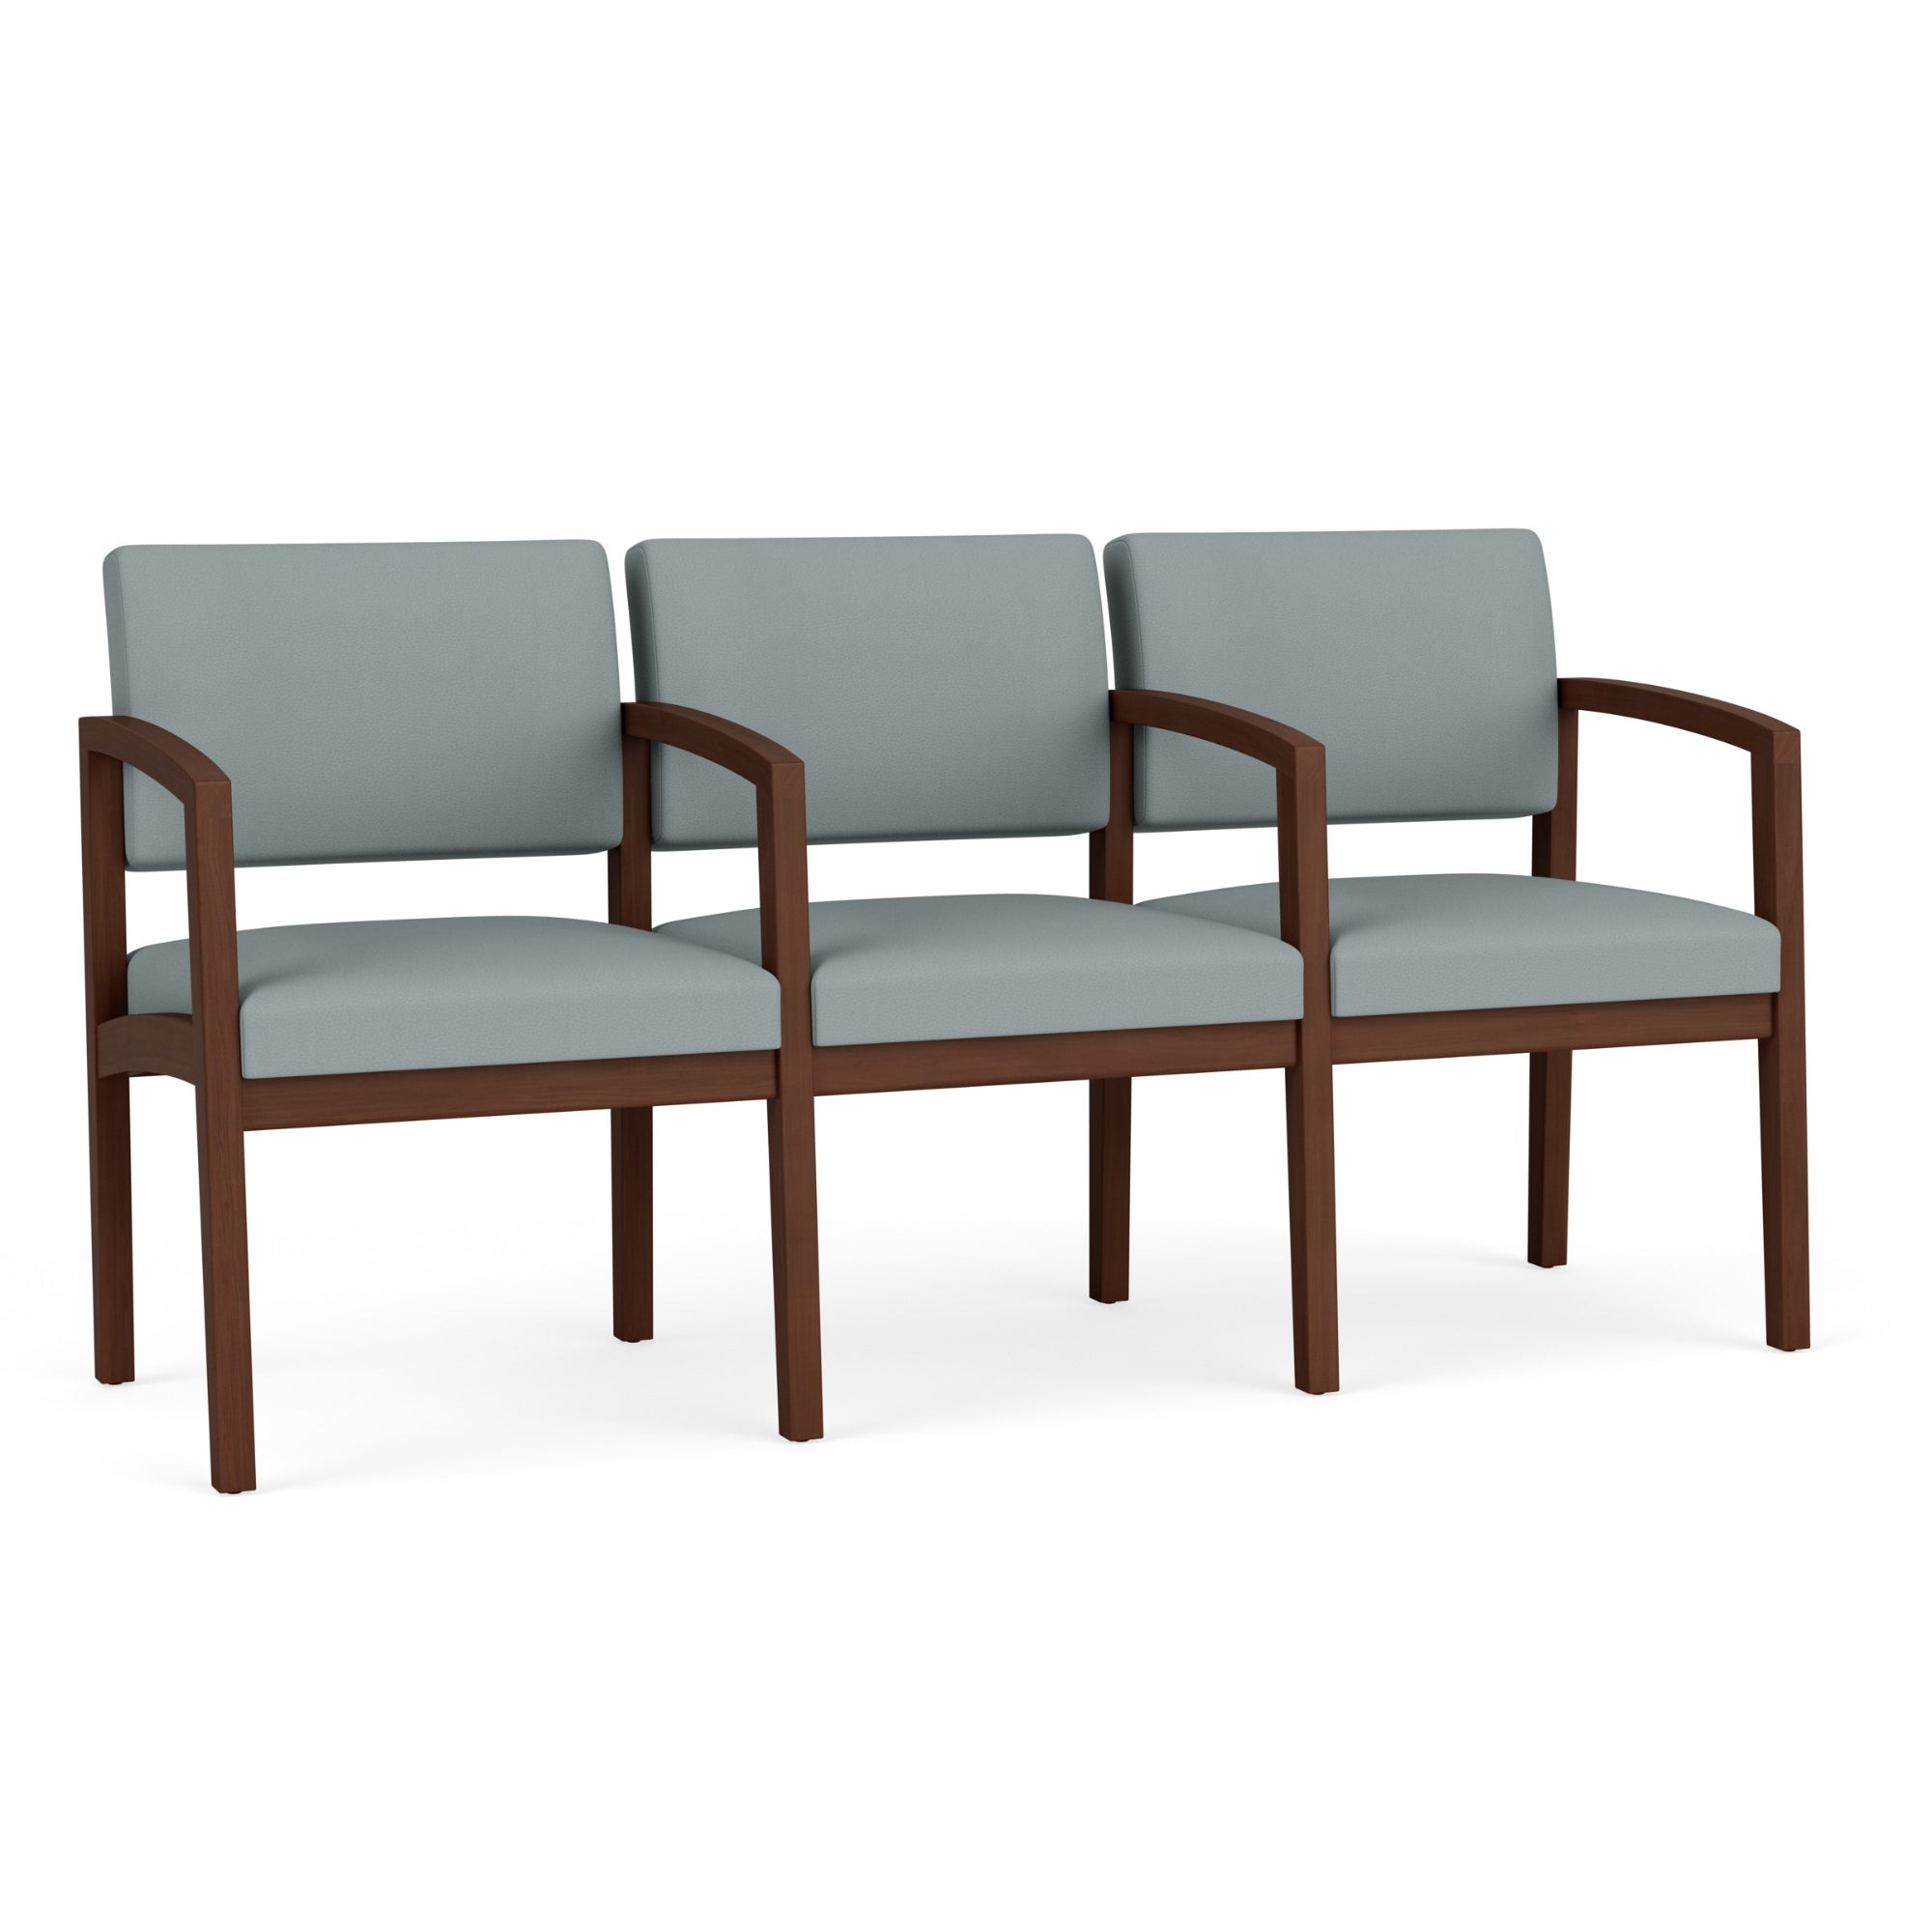 Lenox Wood Collection Reception Seating, 3 Seat Sofa with Center Arms, Healthcare Vinyl Upholstery, FREE SHIPPING